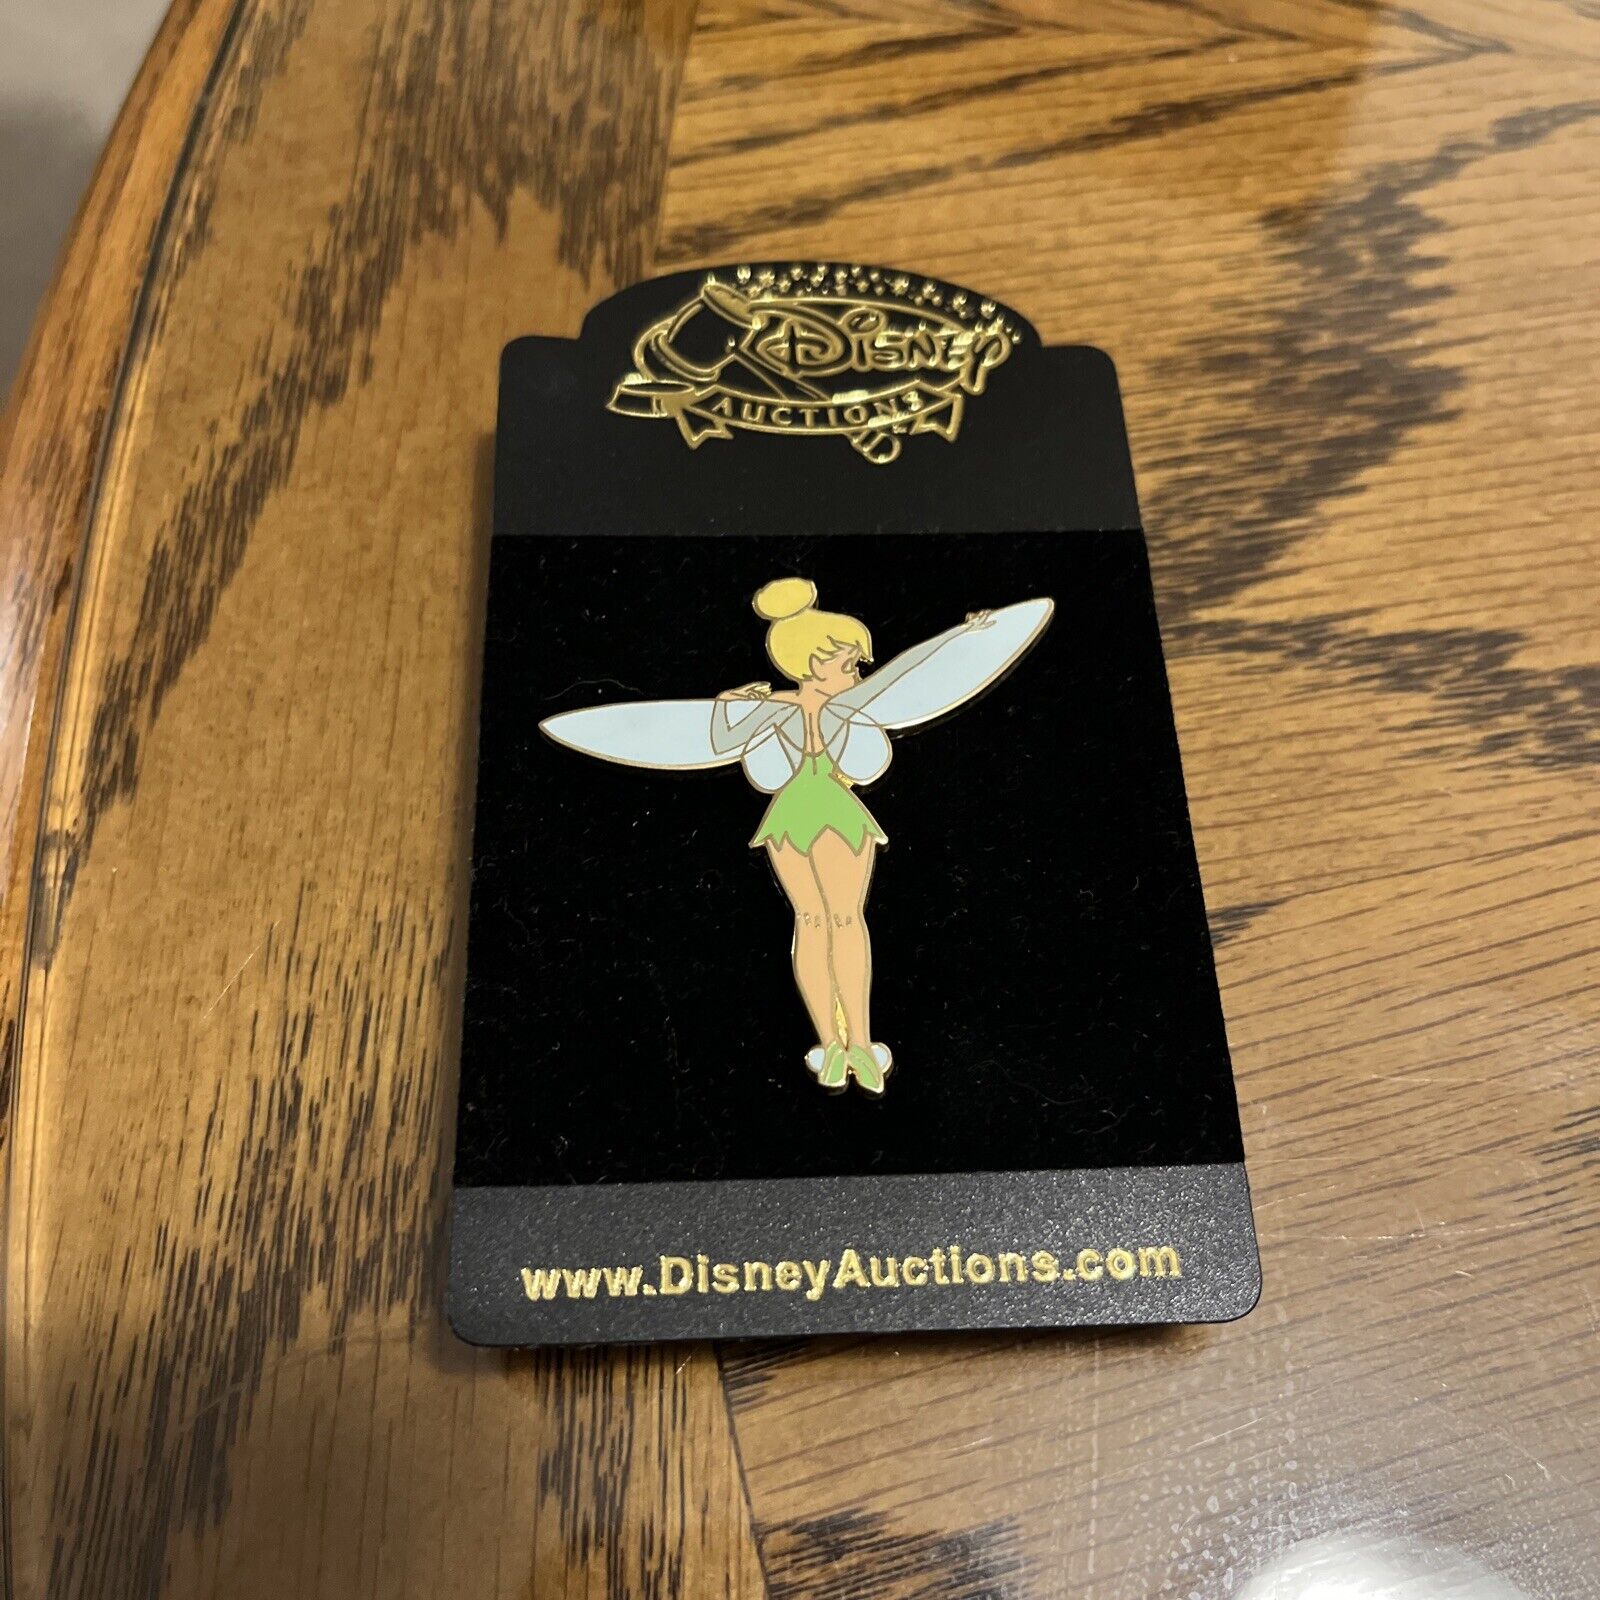 Disney Auctions Think Stretching Her Wings Tinkerbell LE 1000 Pin On Card